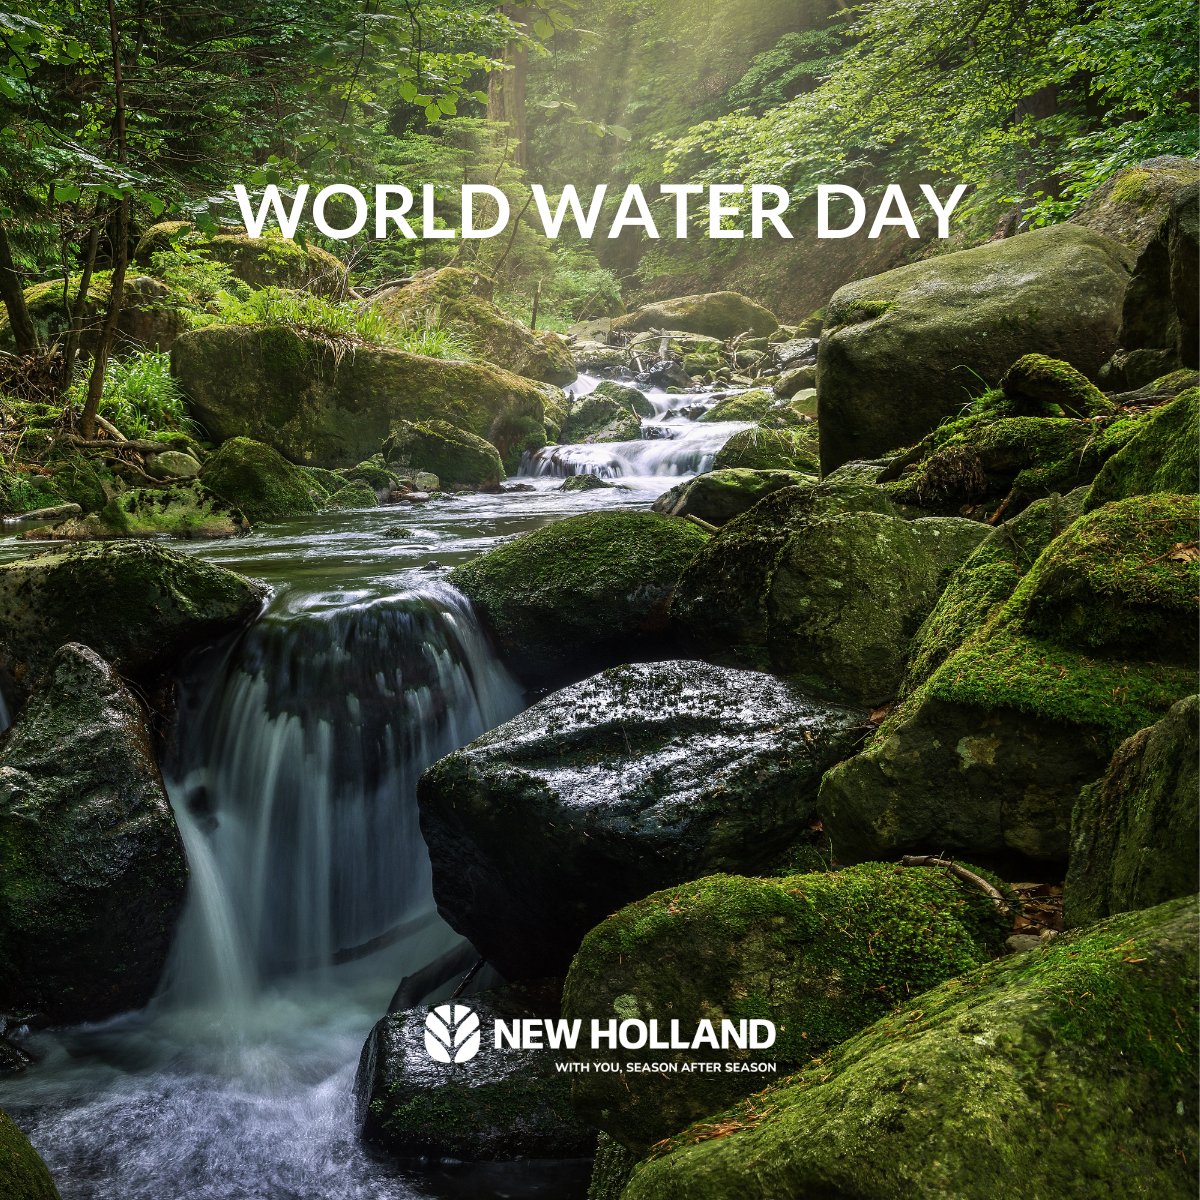 #WorldWaterDay, held on 22 March every year since 1993, is an annual @UN Observance focusing on the importance of freshwater. We celebrate #water and raise awareness of the 2.2 billion people living without access to safe water. unwater.org